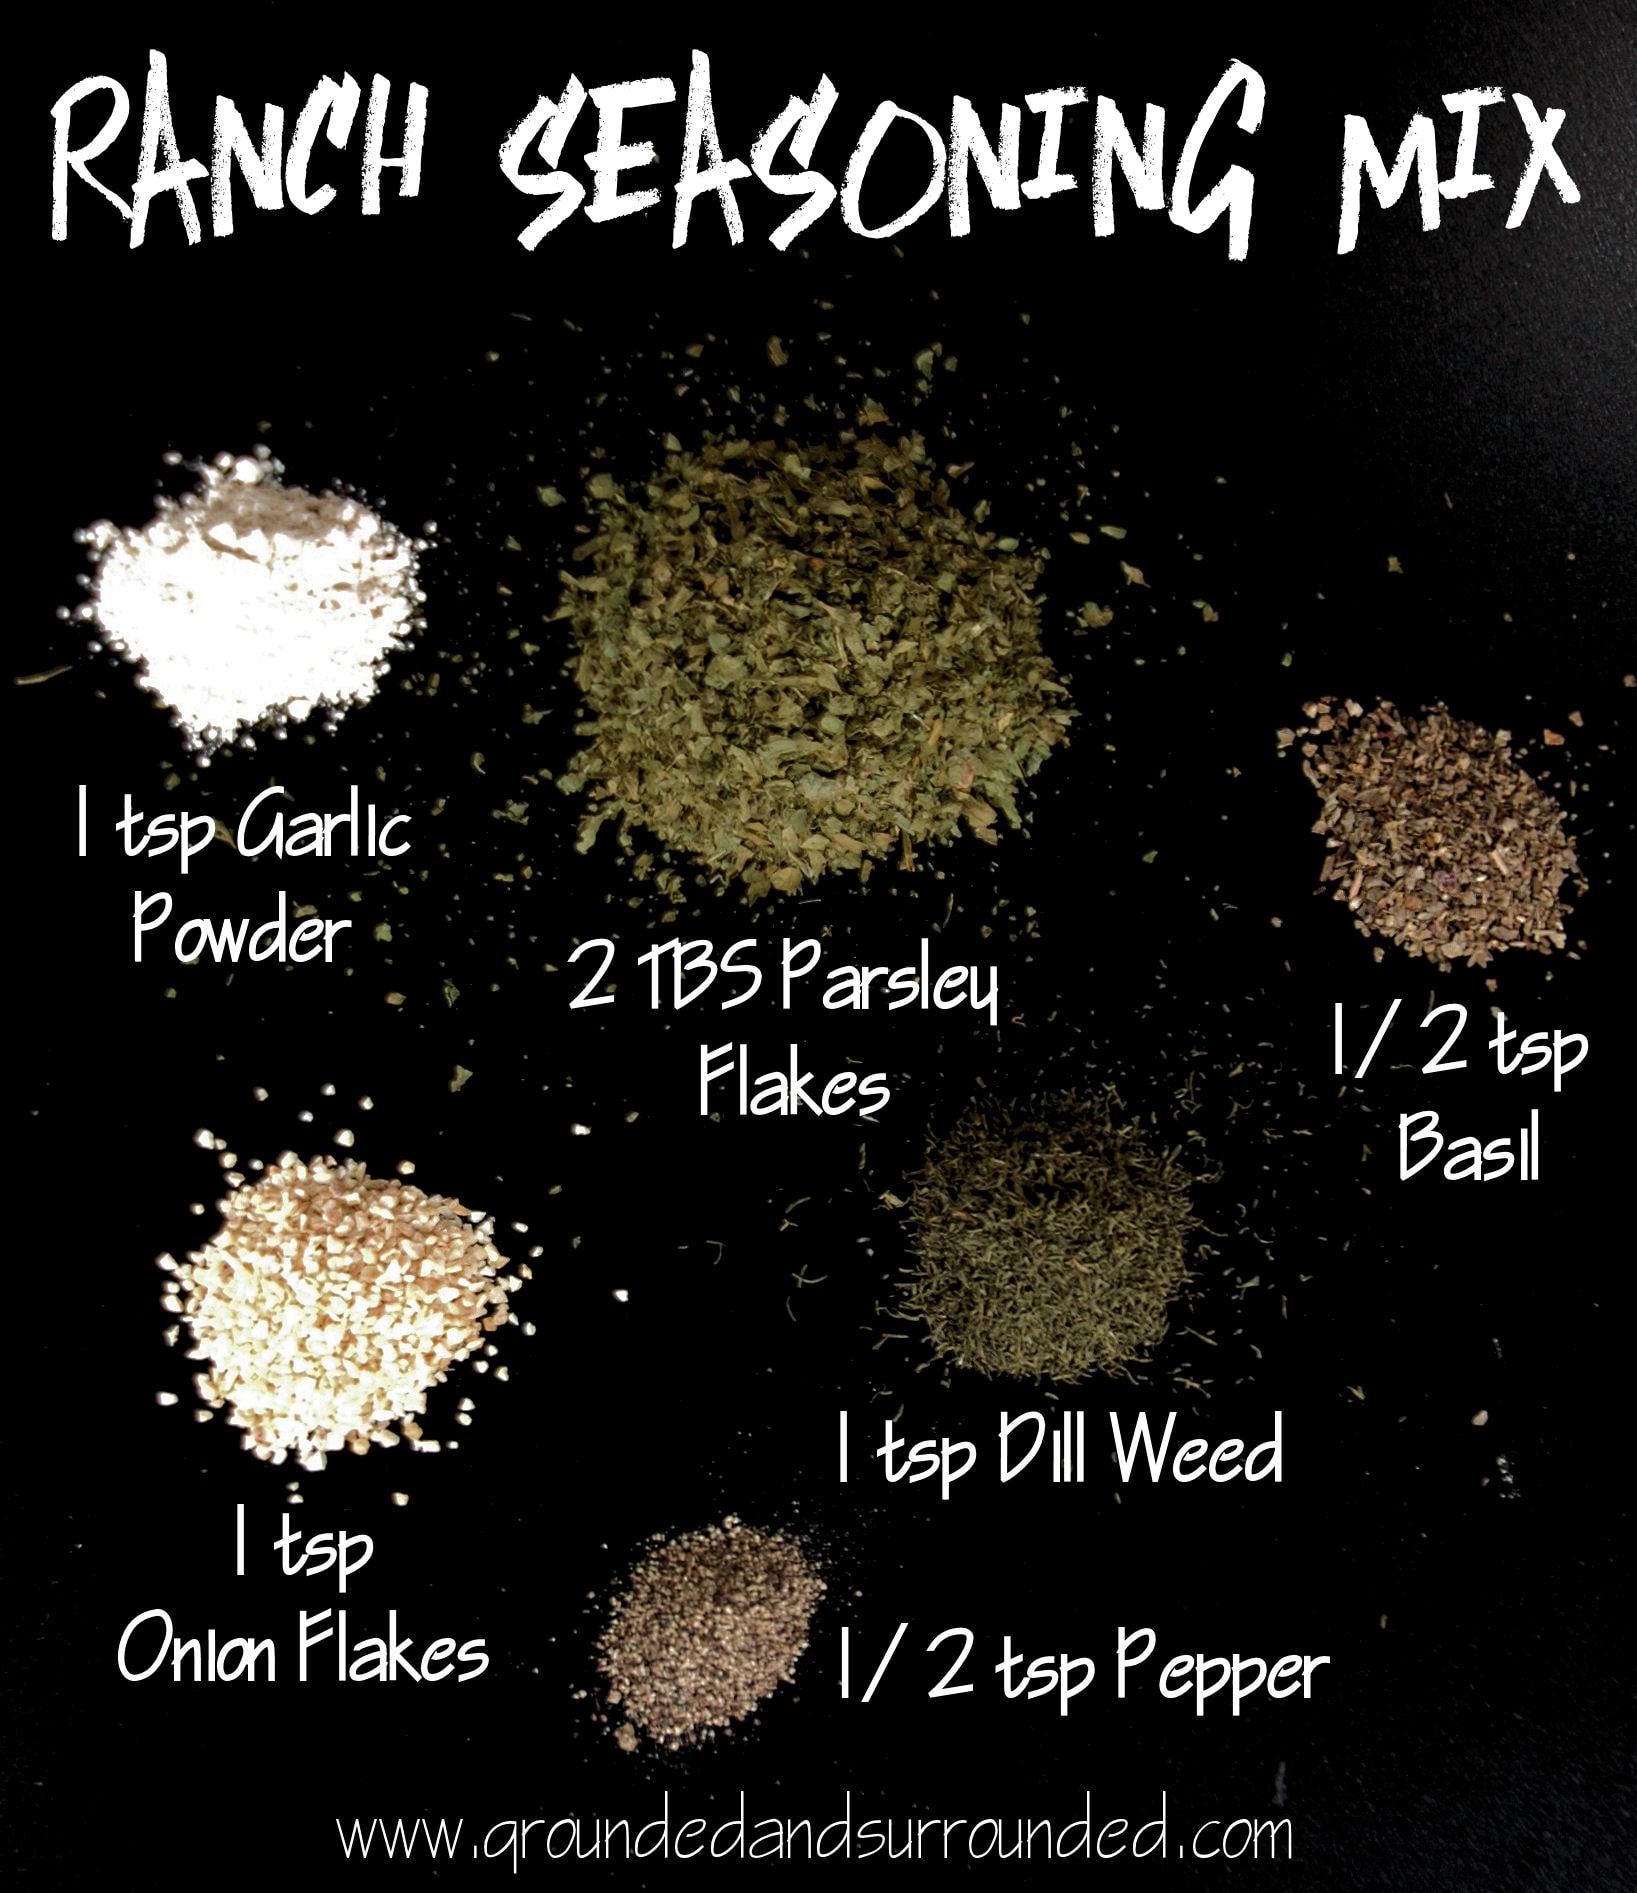 All the ingredients for a homemade ranch seasoning mix on a black background.